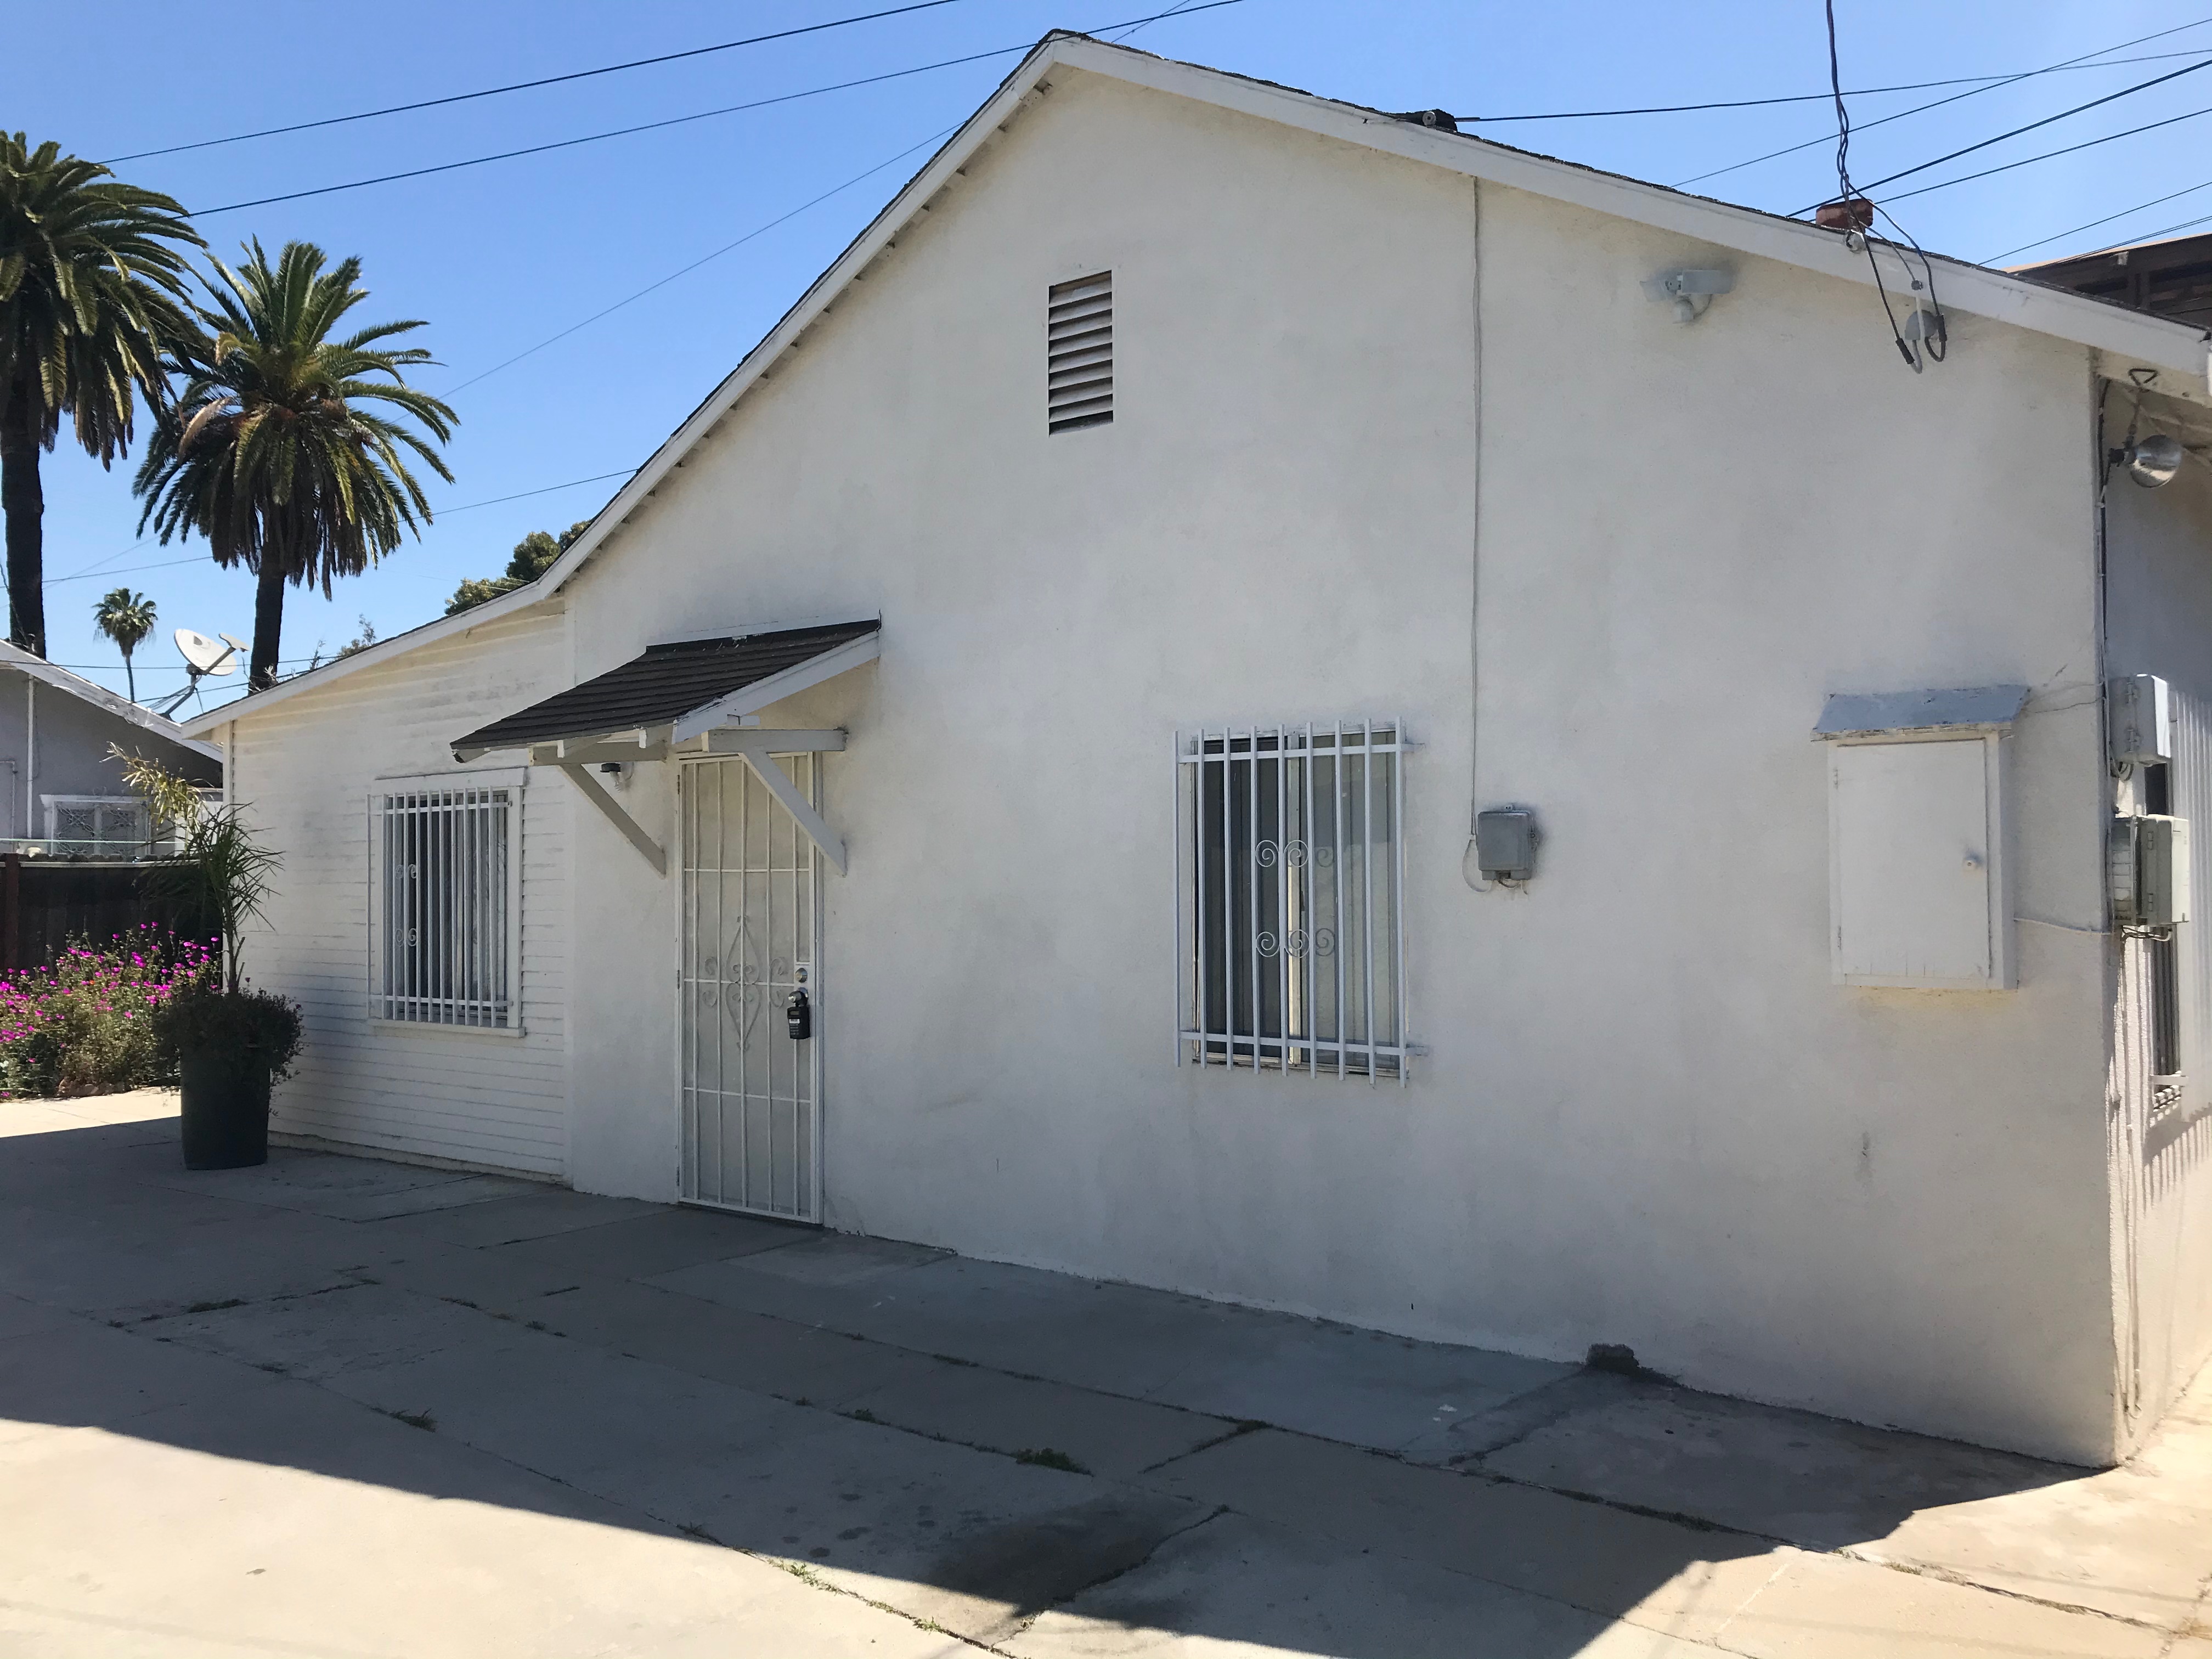 Property Listing For 04/27/20